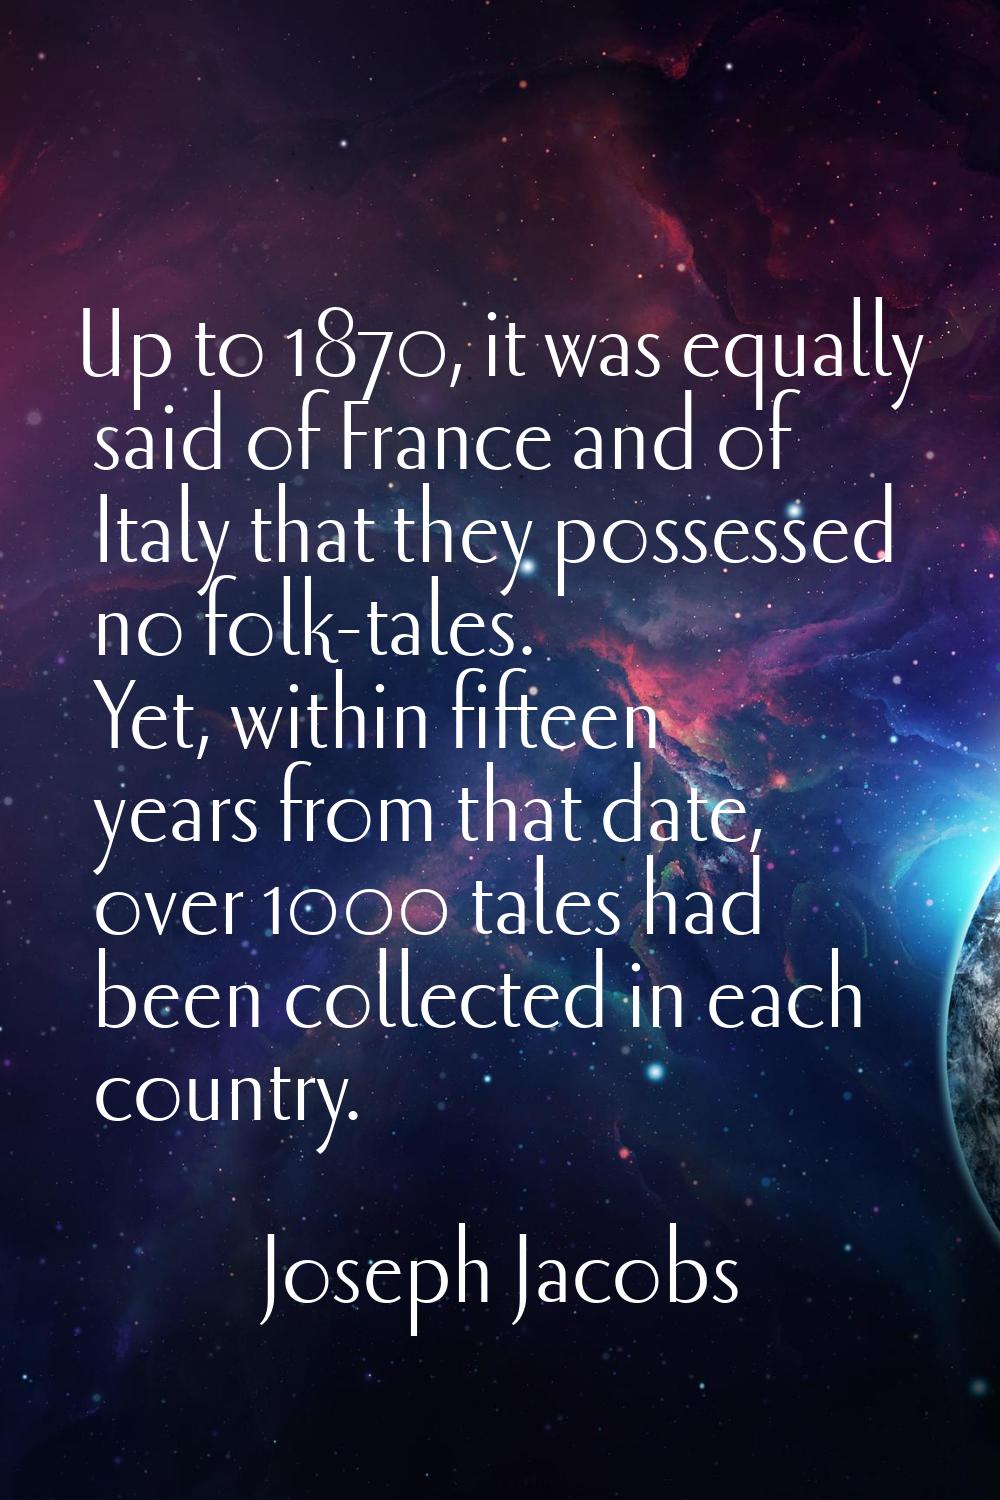 Up to 1870, it was equally said of France and of Italy that they possessed no folk-tales. Yet, with